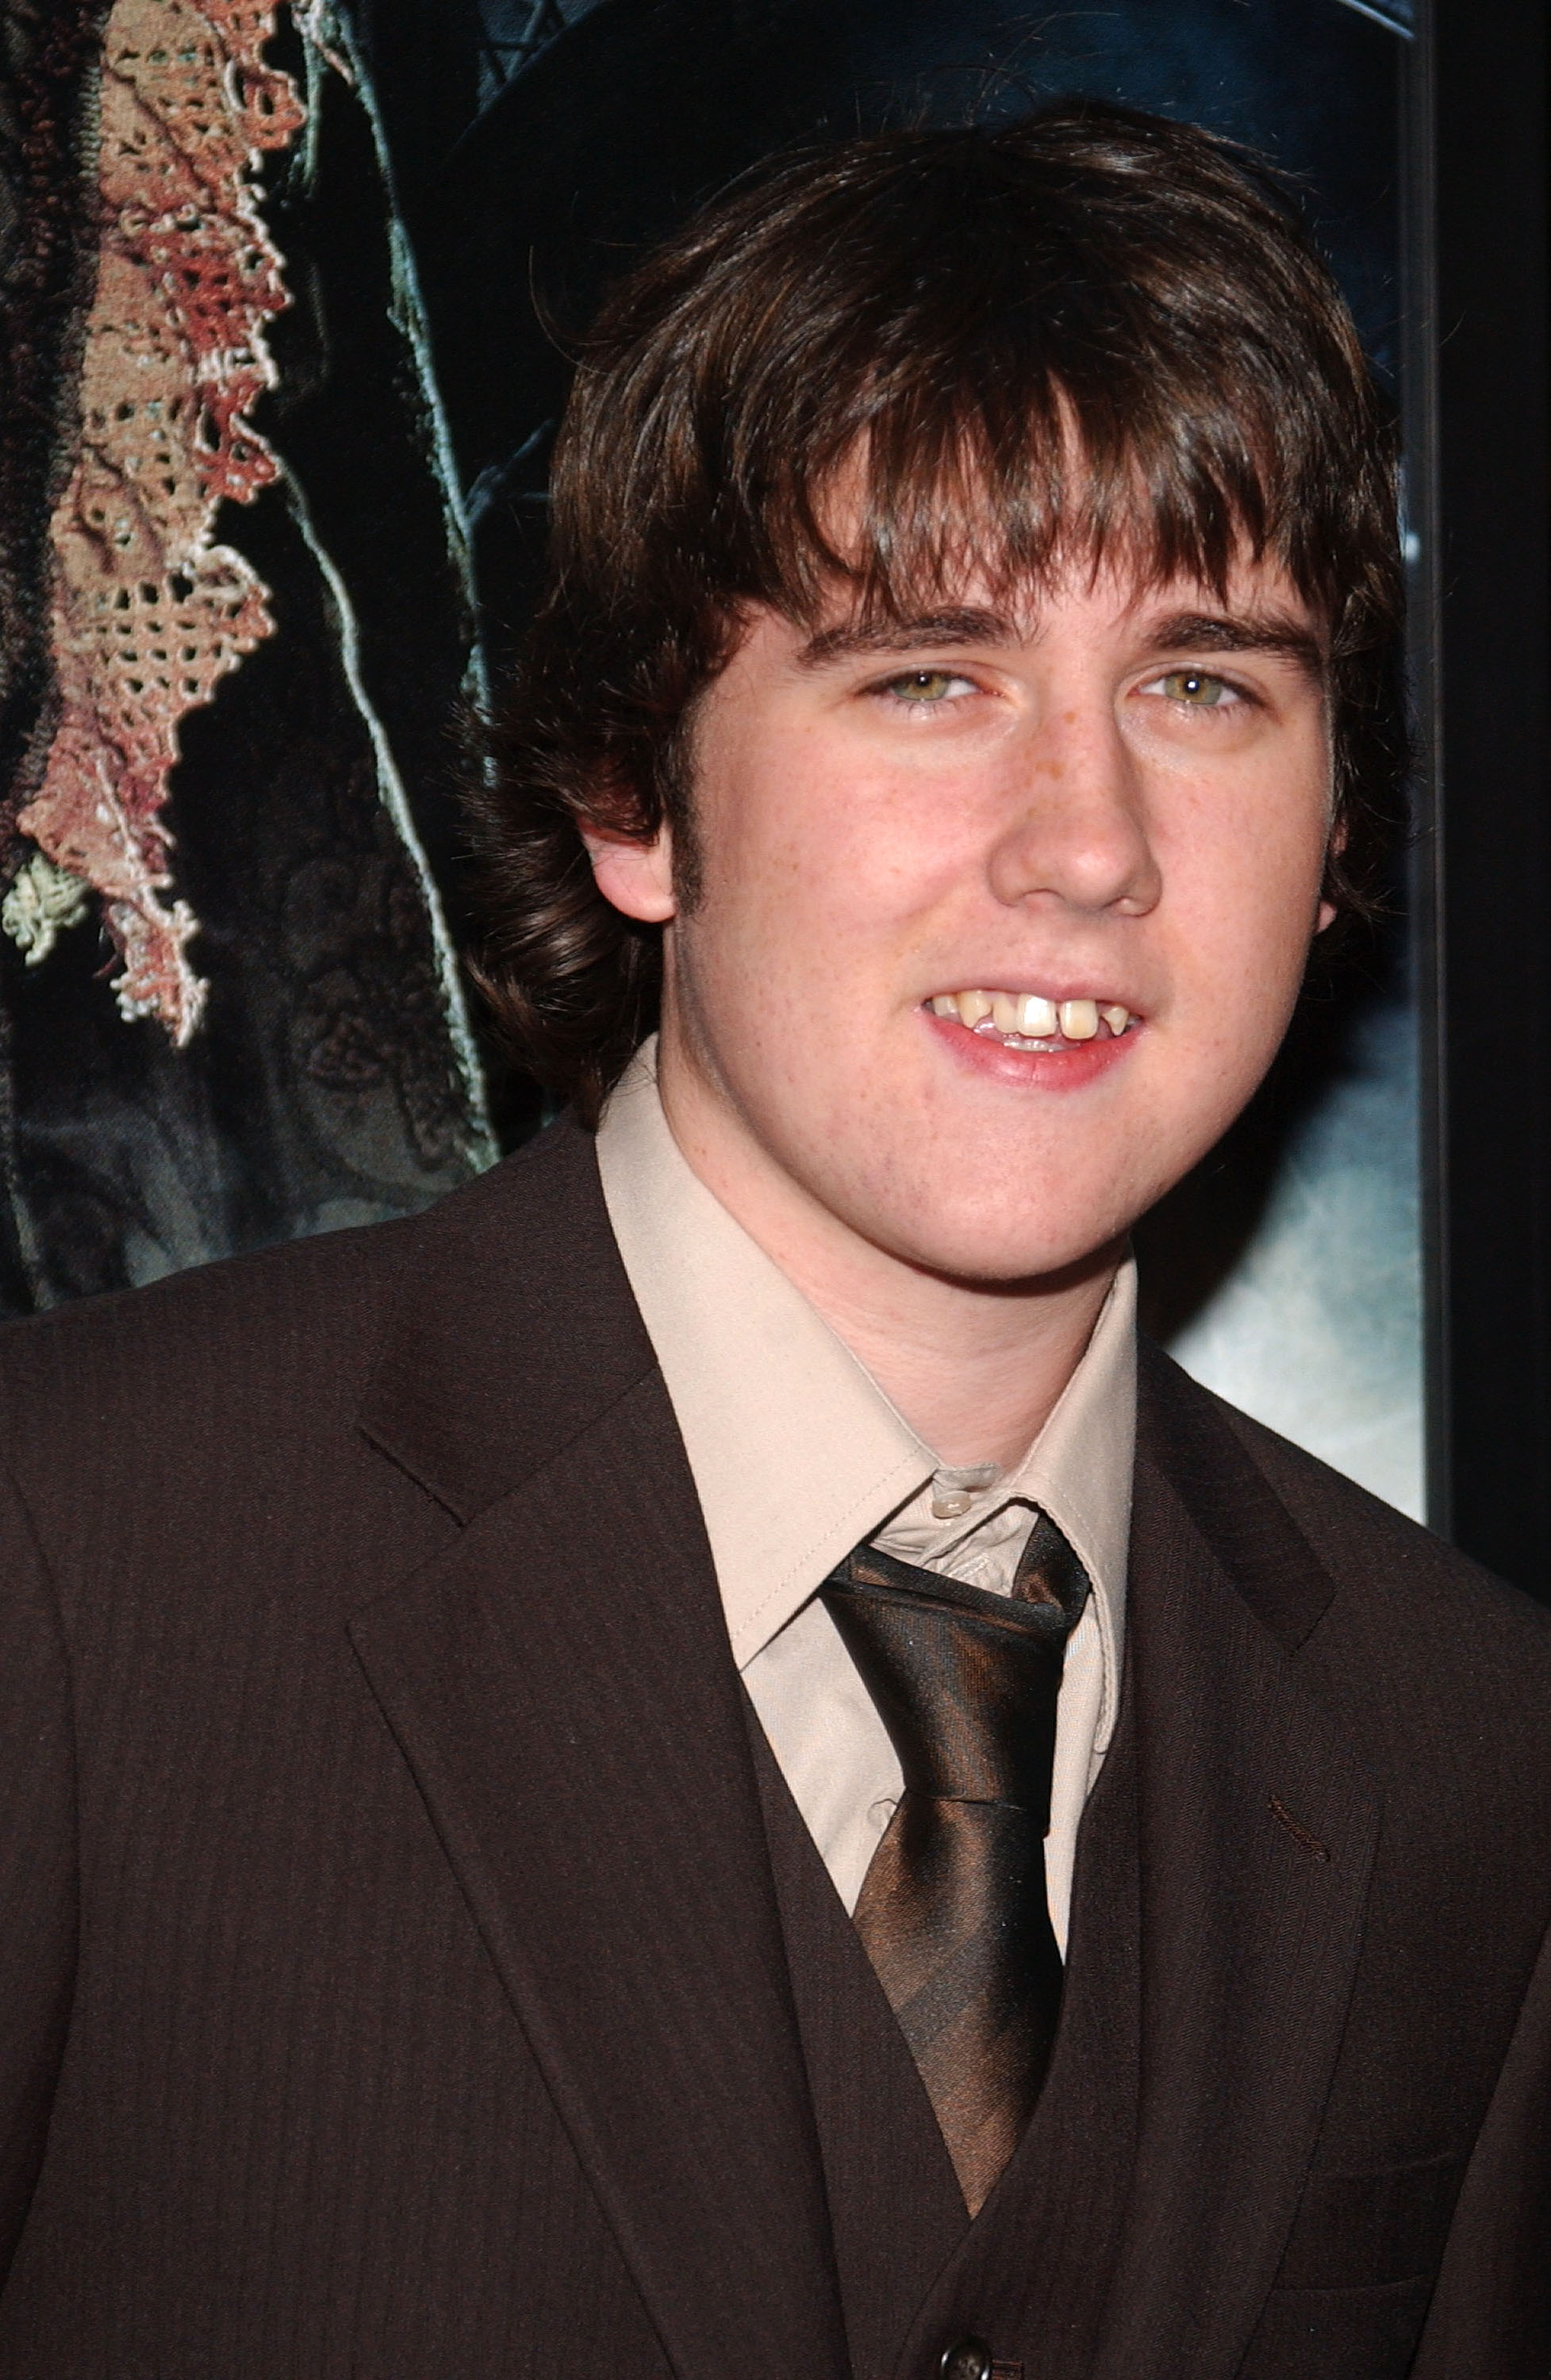 Matthew Lewis at the premiere of "Harry Potter & The Goblet Of Fire" on November 12, 2005, in New York City. | Source: Getty Images